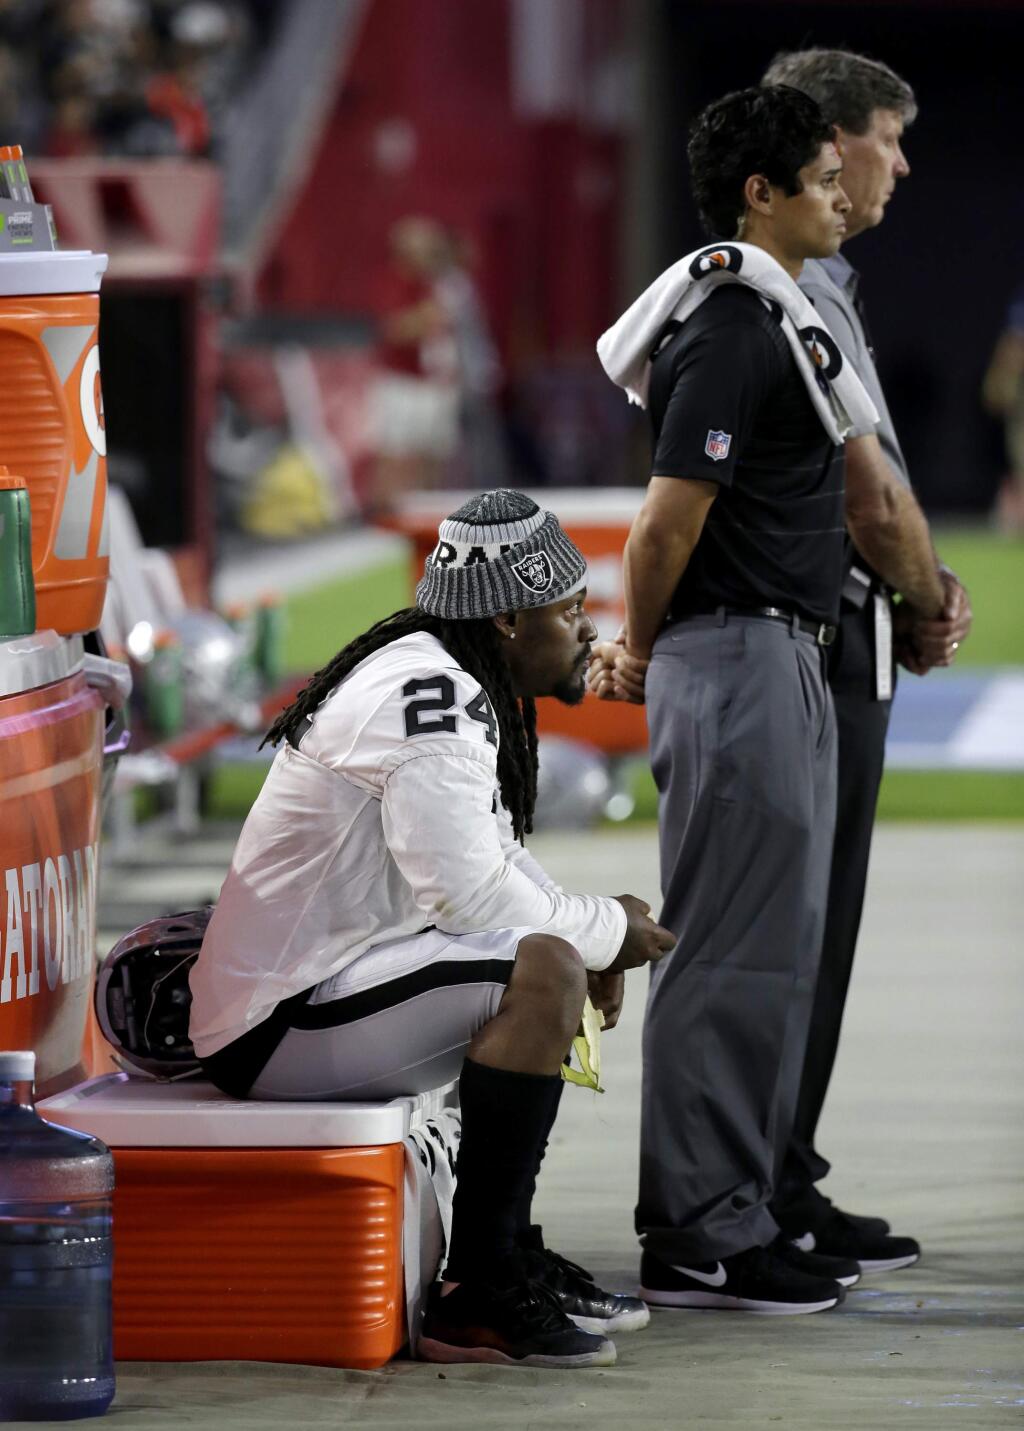 FILE - In this Aug. 12, 2017, file photo, Oakland Raiders running back Marshawn Lynch sits during the national anthem prior to the team's NFL preseason football game against the Arizona Cardinals in Glendale, Ariz. What started as a protest against police brutality has mushroomed a year later into a divisive debate over the future of former San Francisco 49ers quarterback Colin Kaepernick who refused to stand for the national anthem and now faces what his fans see as blackballing for speaking out in a country roiled by racial strife. Other prominent NFL players, such as Lynch, have sat out or demonstrated during anthems this preseason. (AP Photo/Rick Scuteri, File)